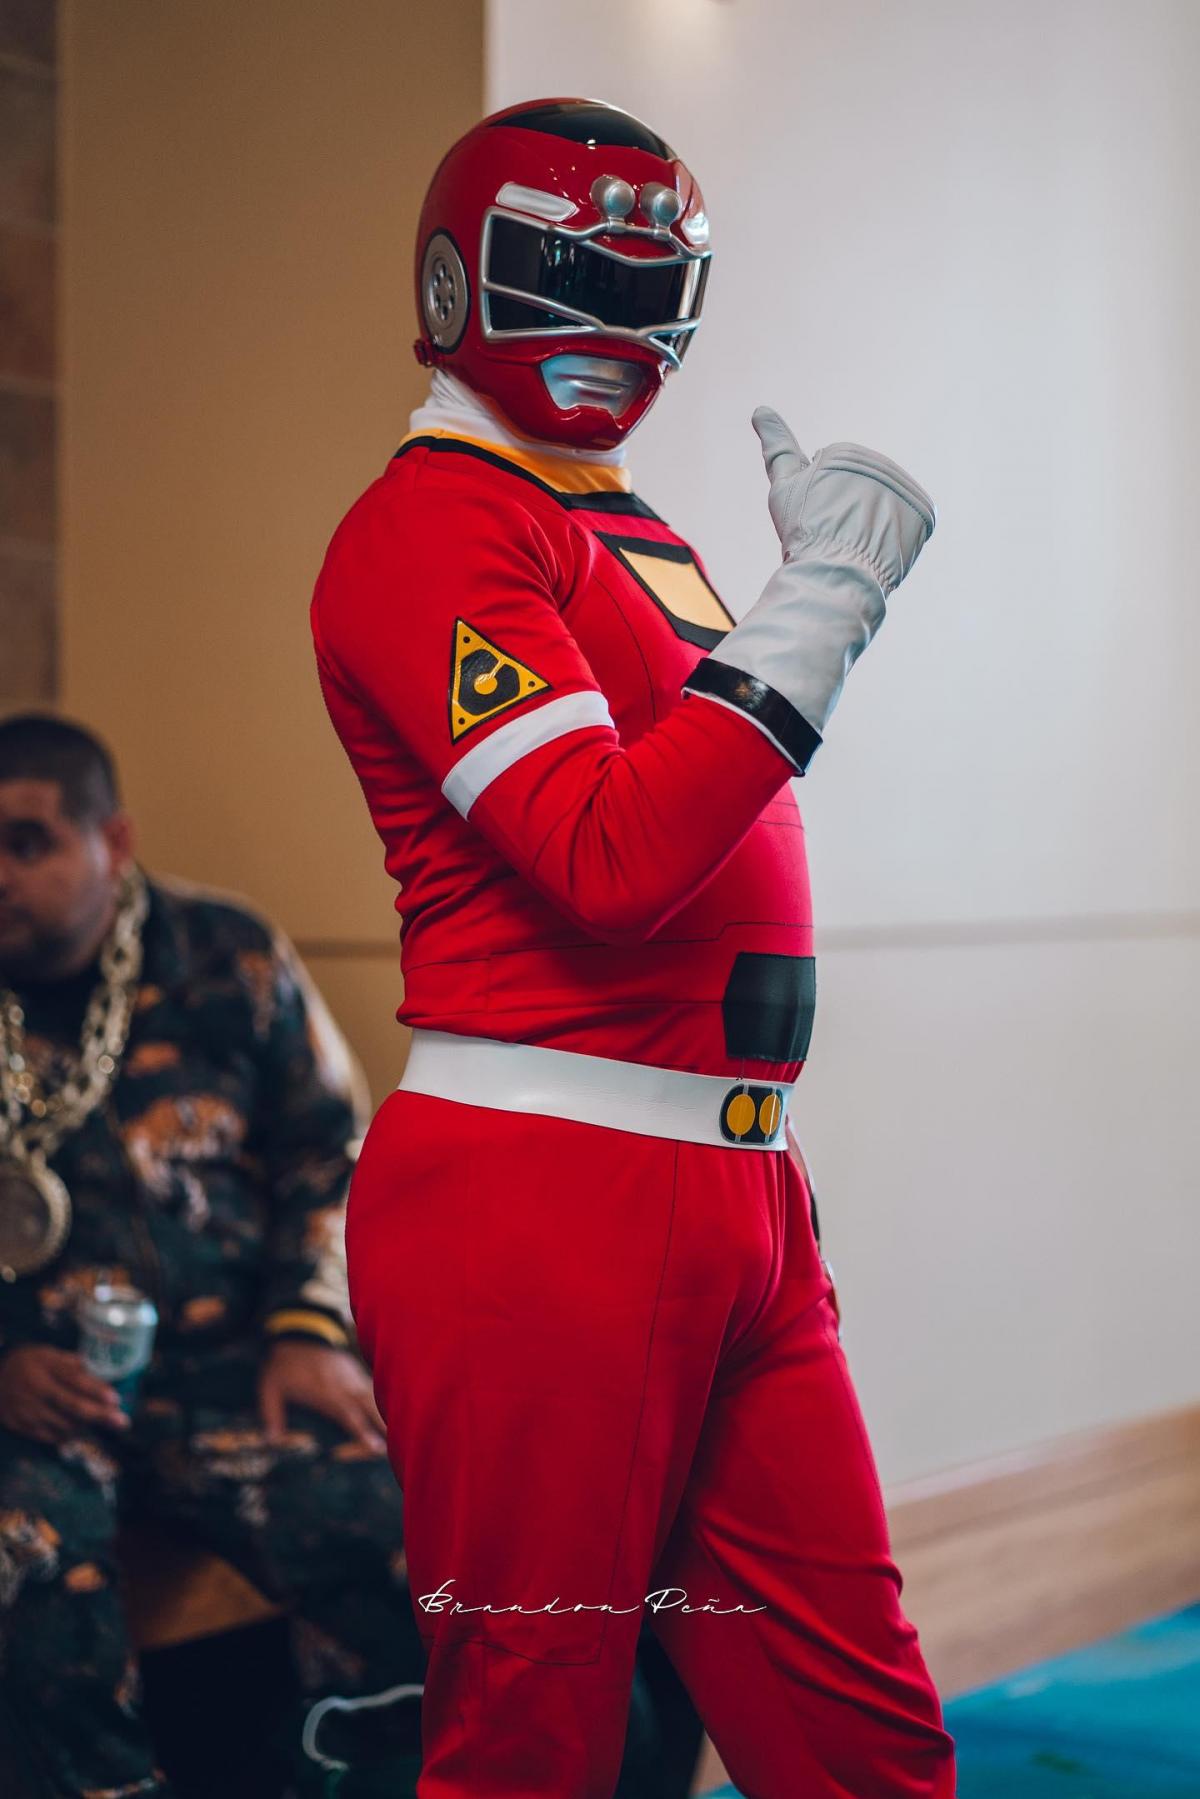 Red Turbo Ranger Cosplay Costume - Power Rangers Turbo Tommy Oliver Outfit photo review